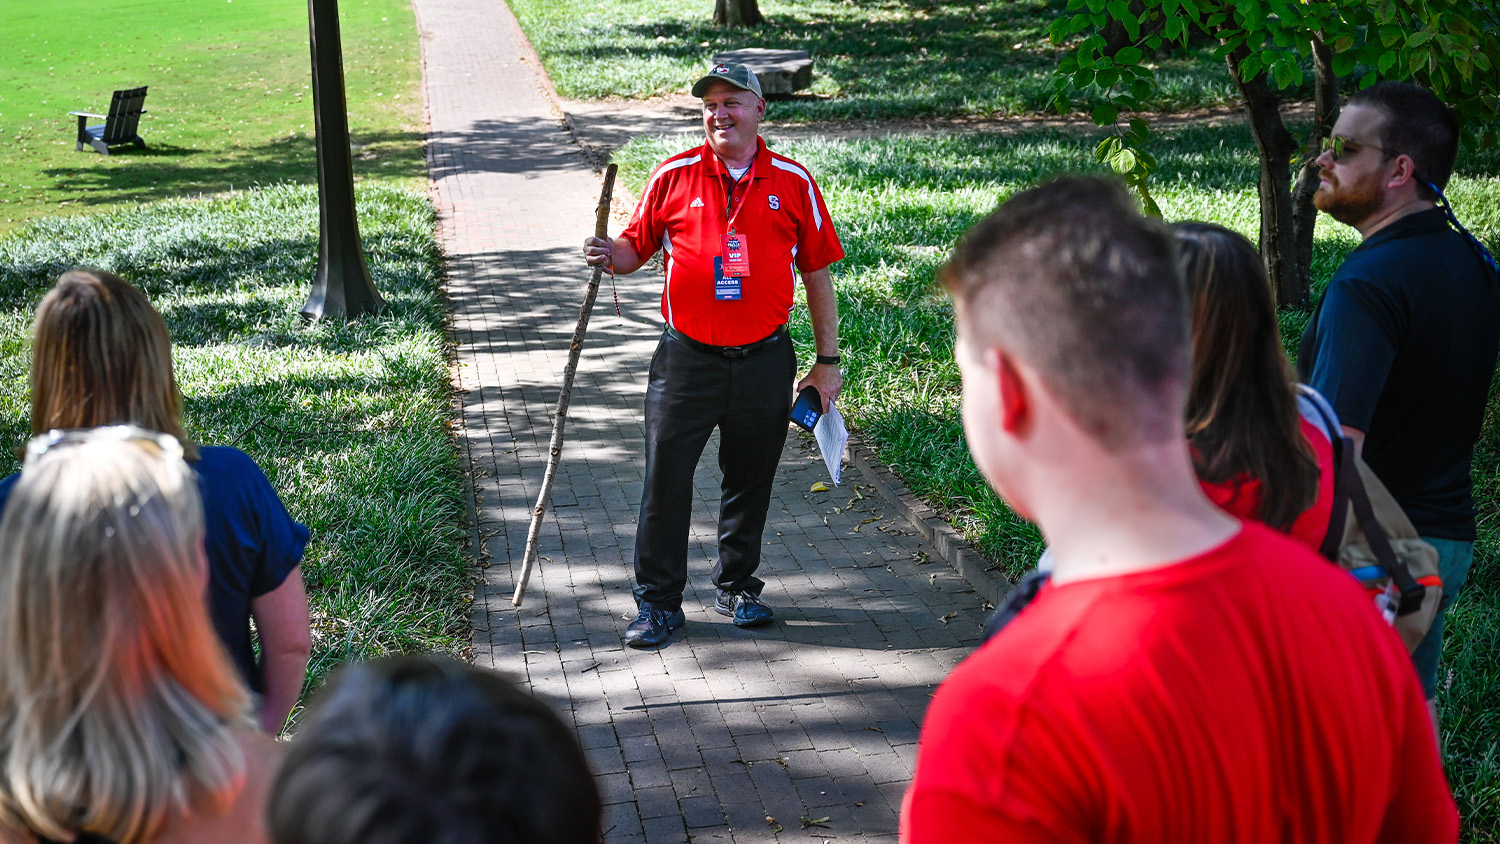 Tim Peeler standing on a brick path and holding a walking stick while speaking to a small crowd of people